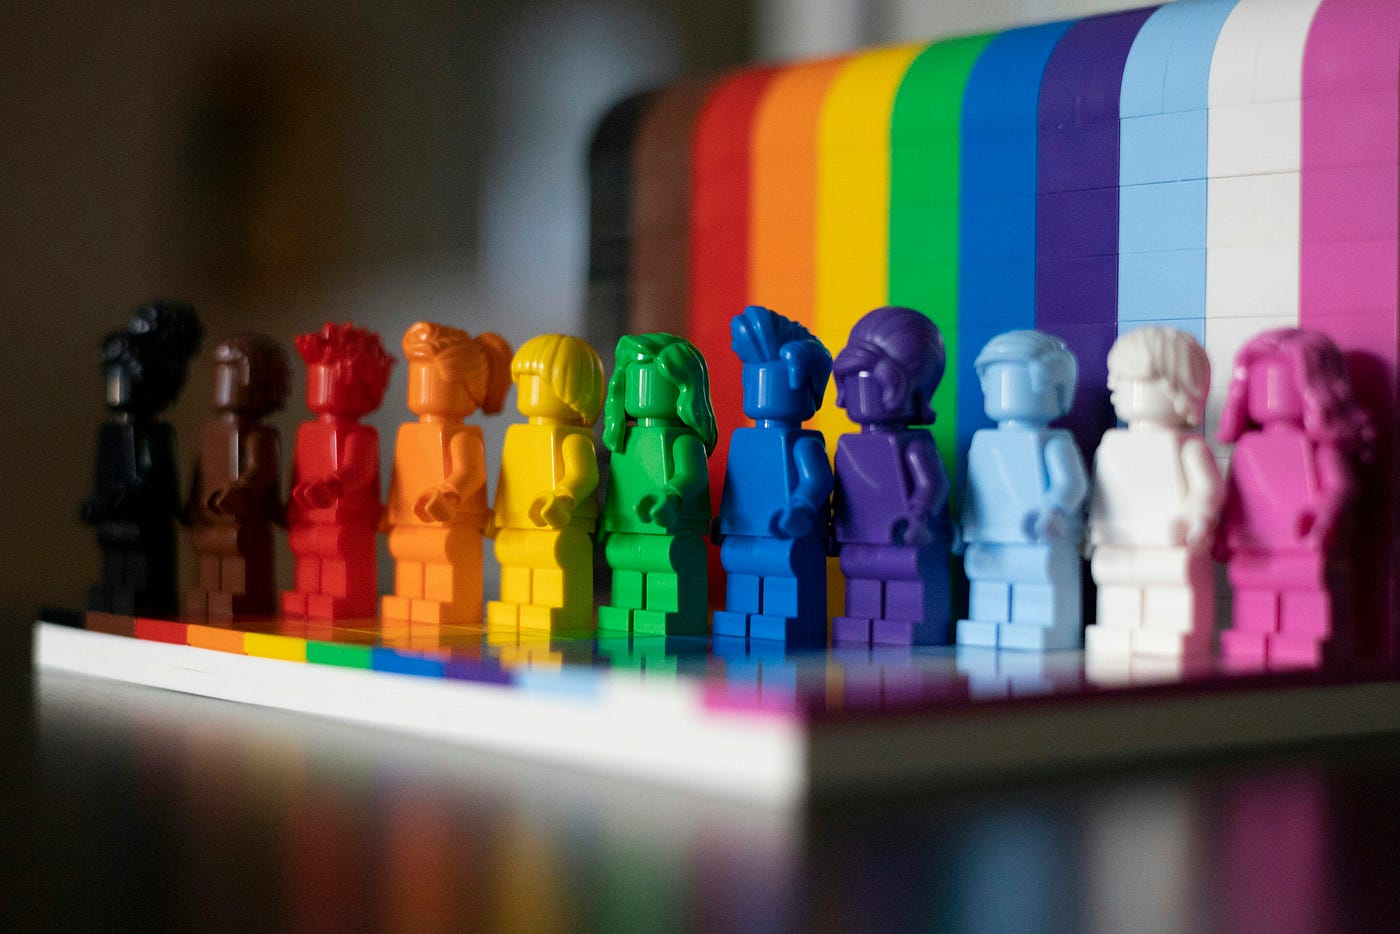 Lego unveils first LGBTQ set ahead of Pride Month